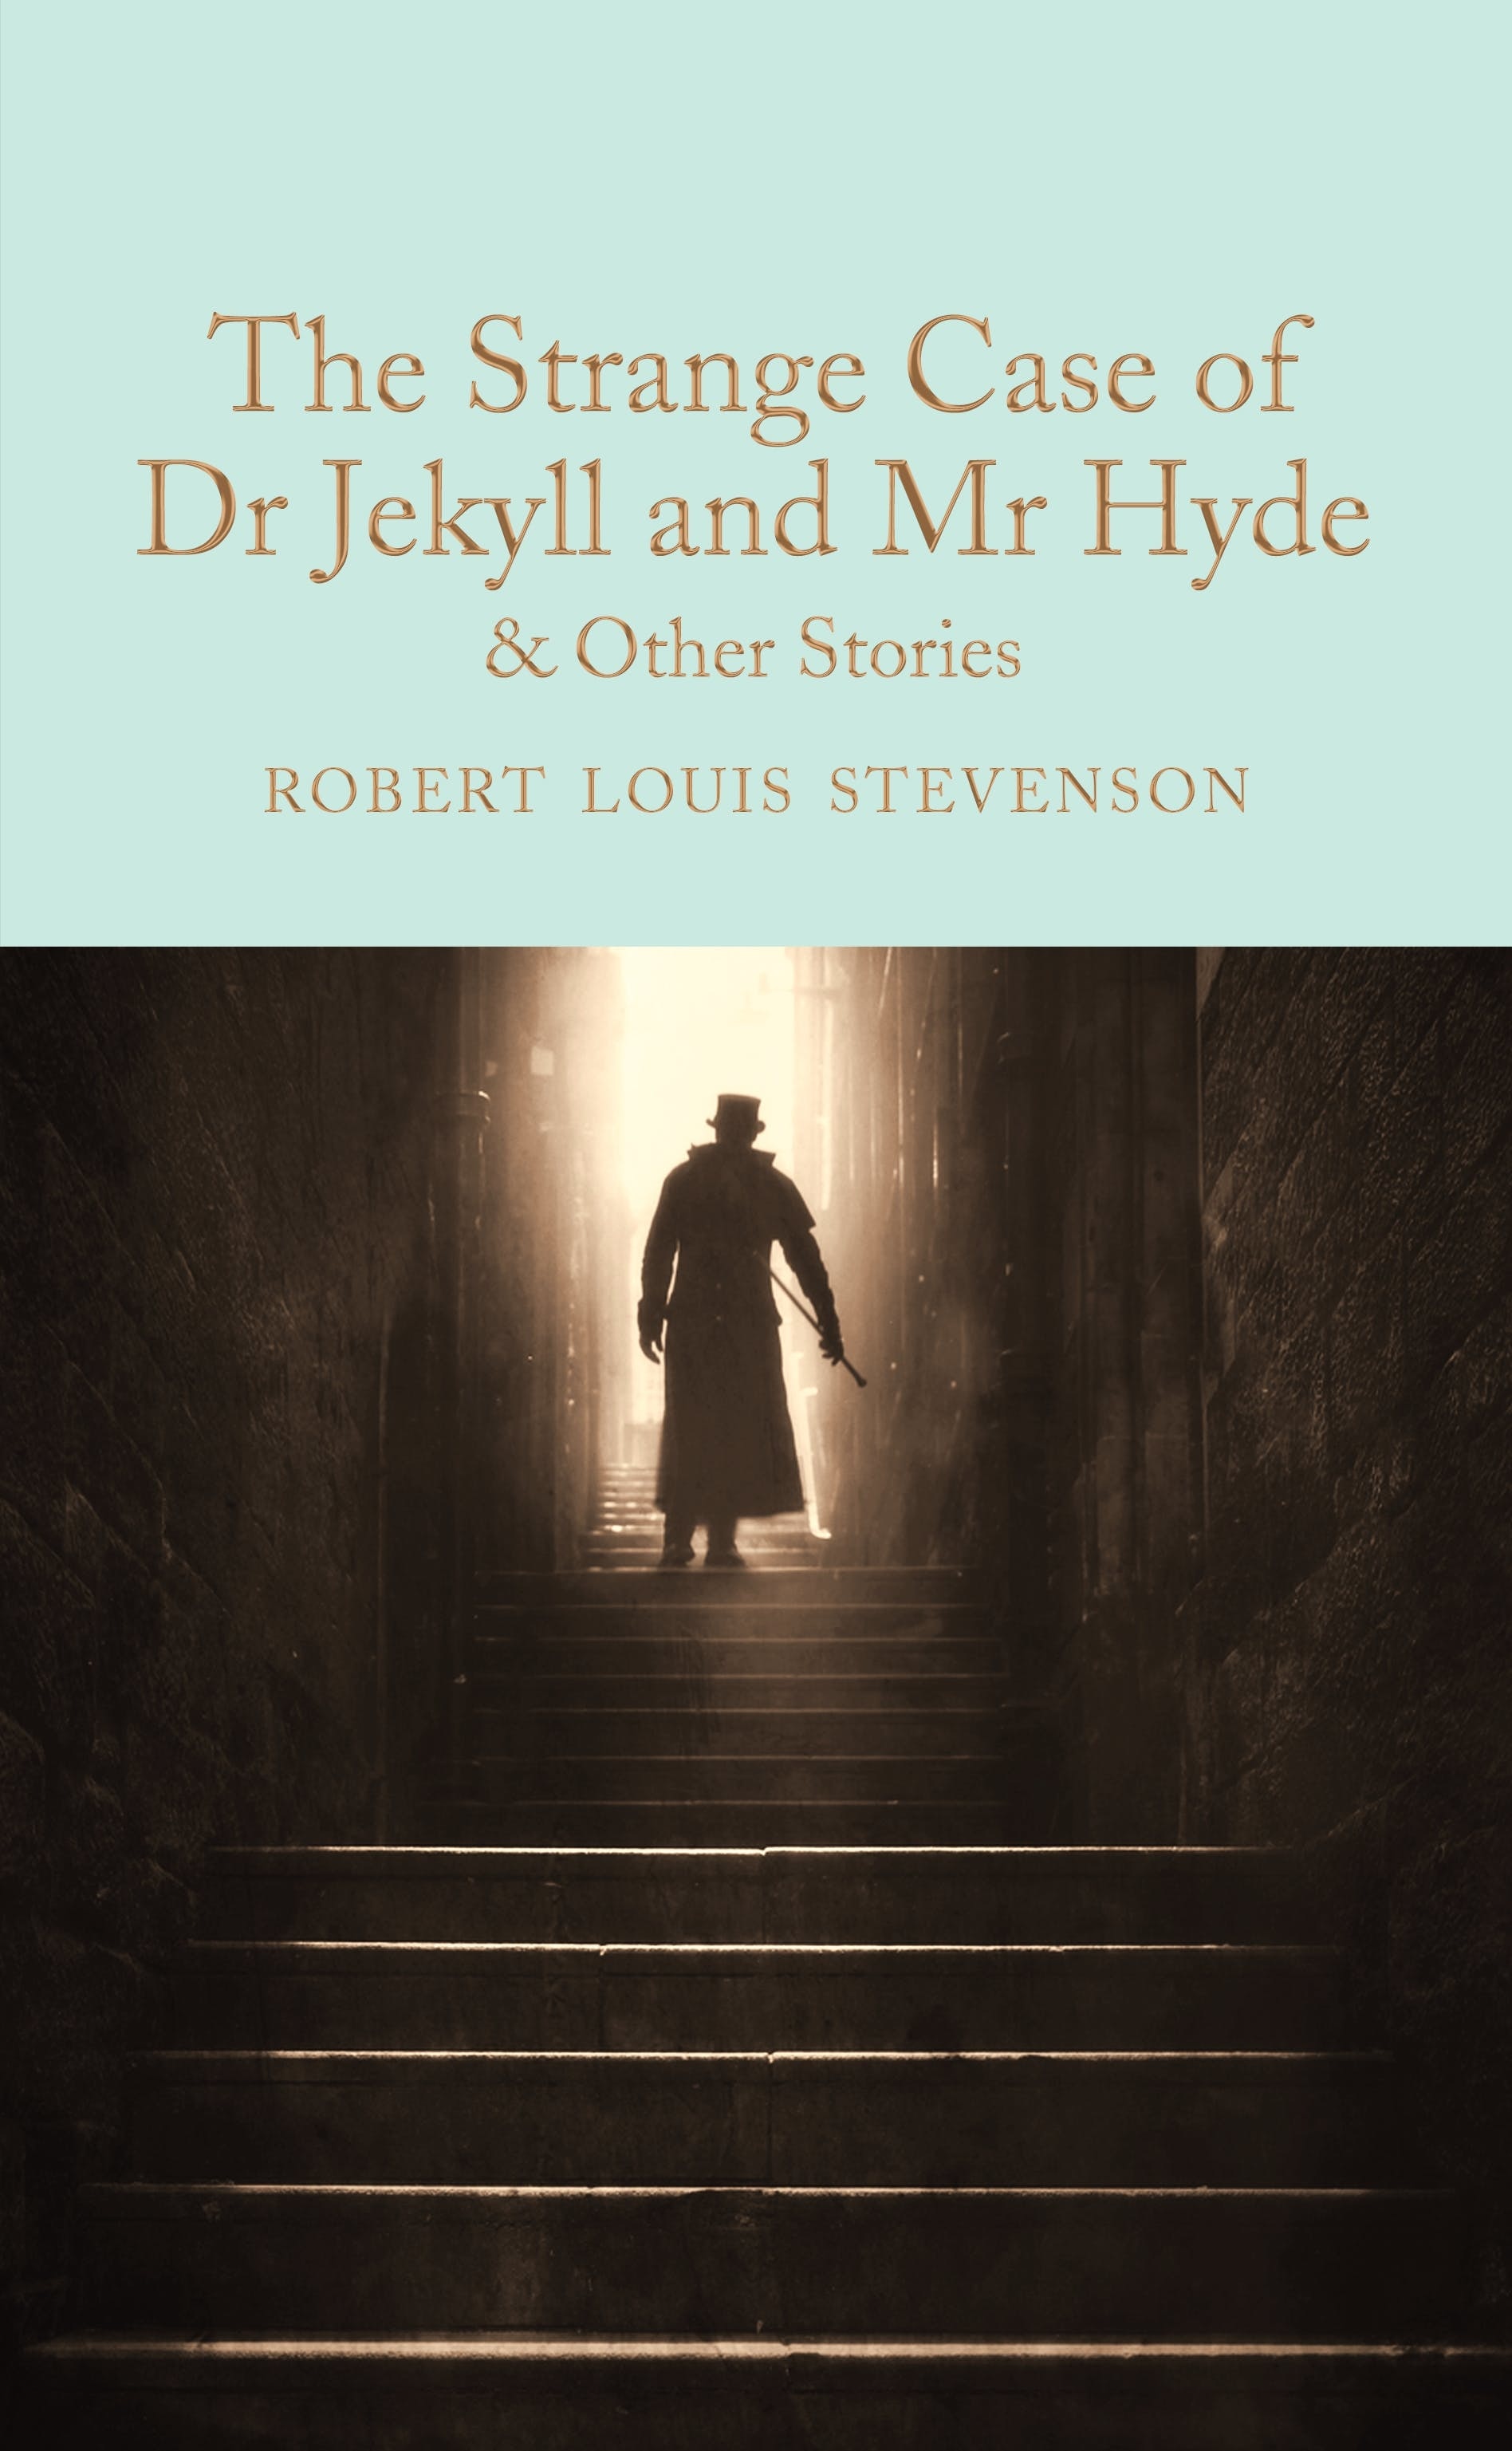 Book “The Strange Case of Dr Jekyll and Mr Hyde” by Robert Louis Stevenson — July 25, 2017